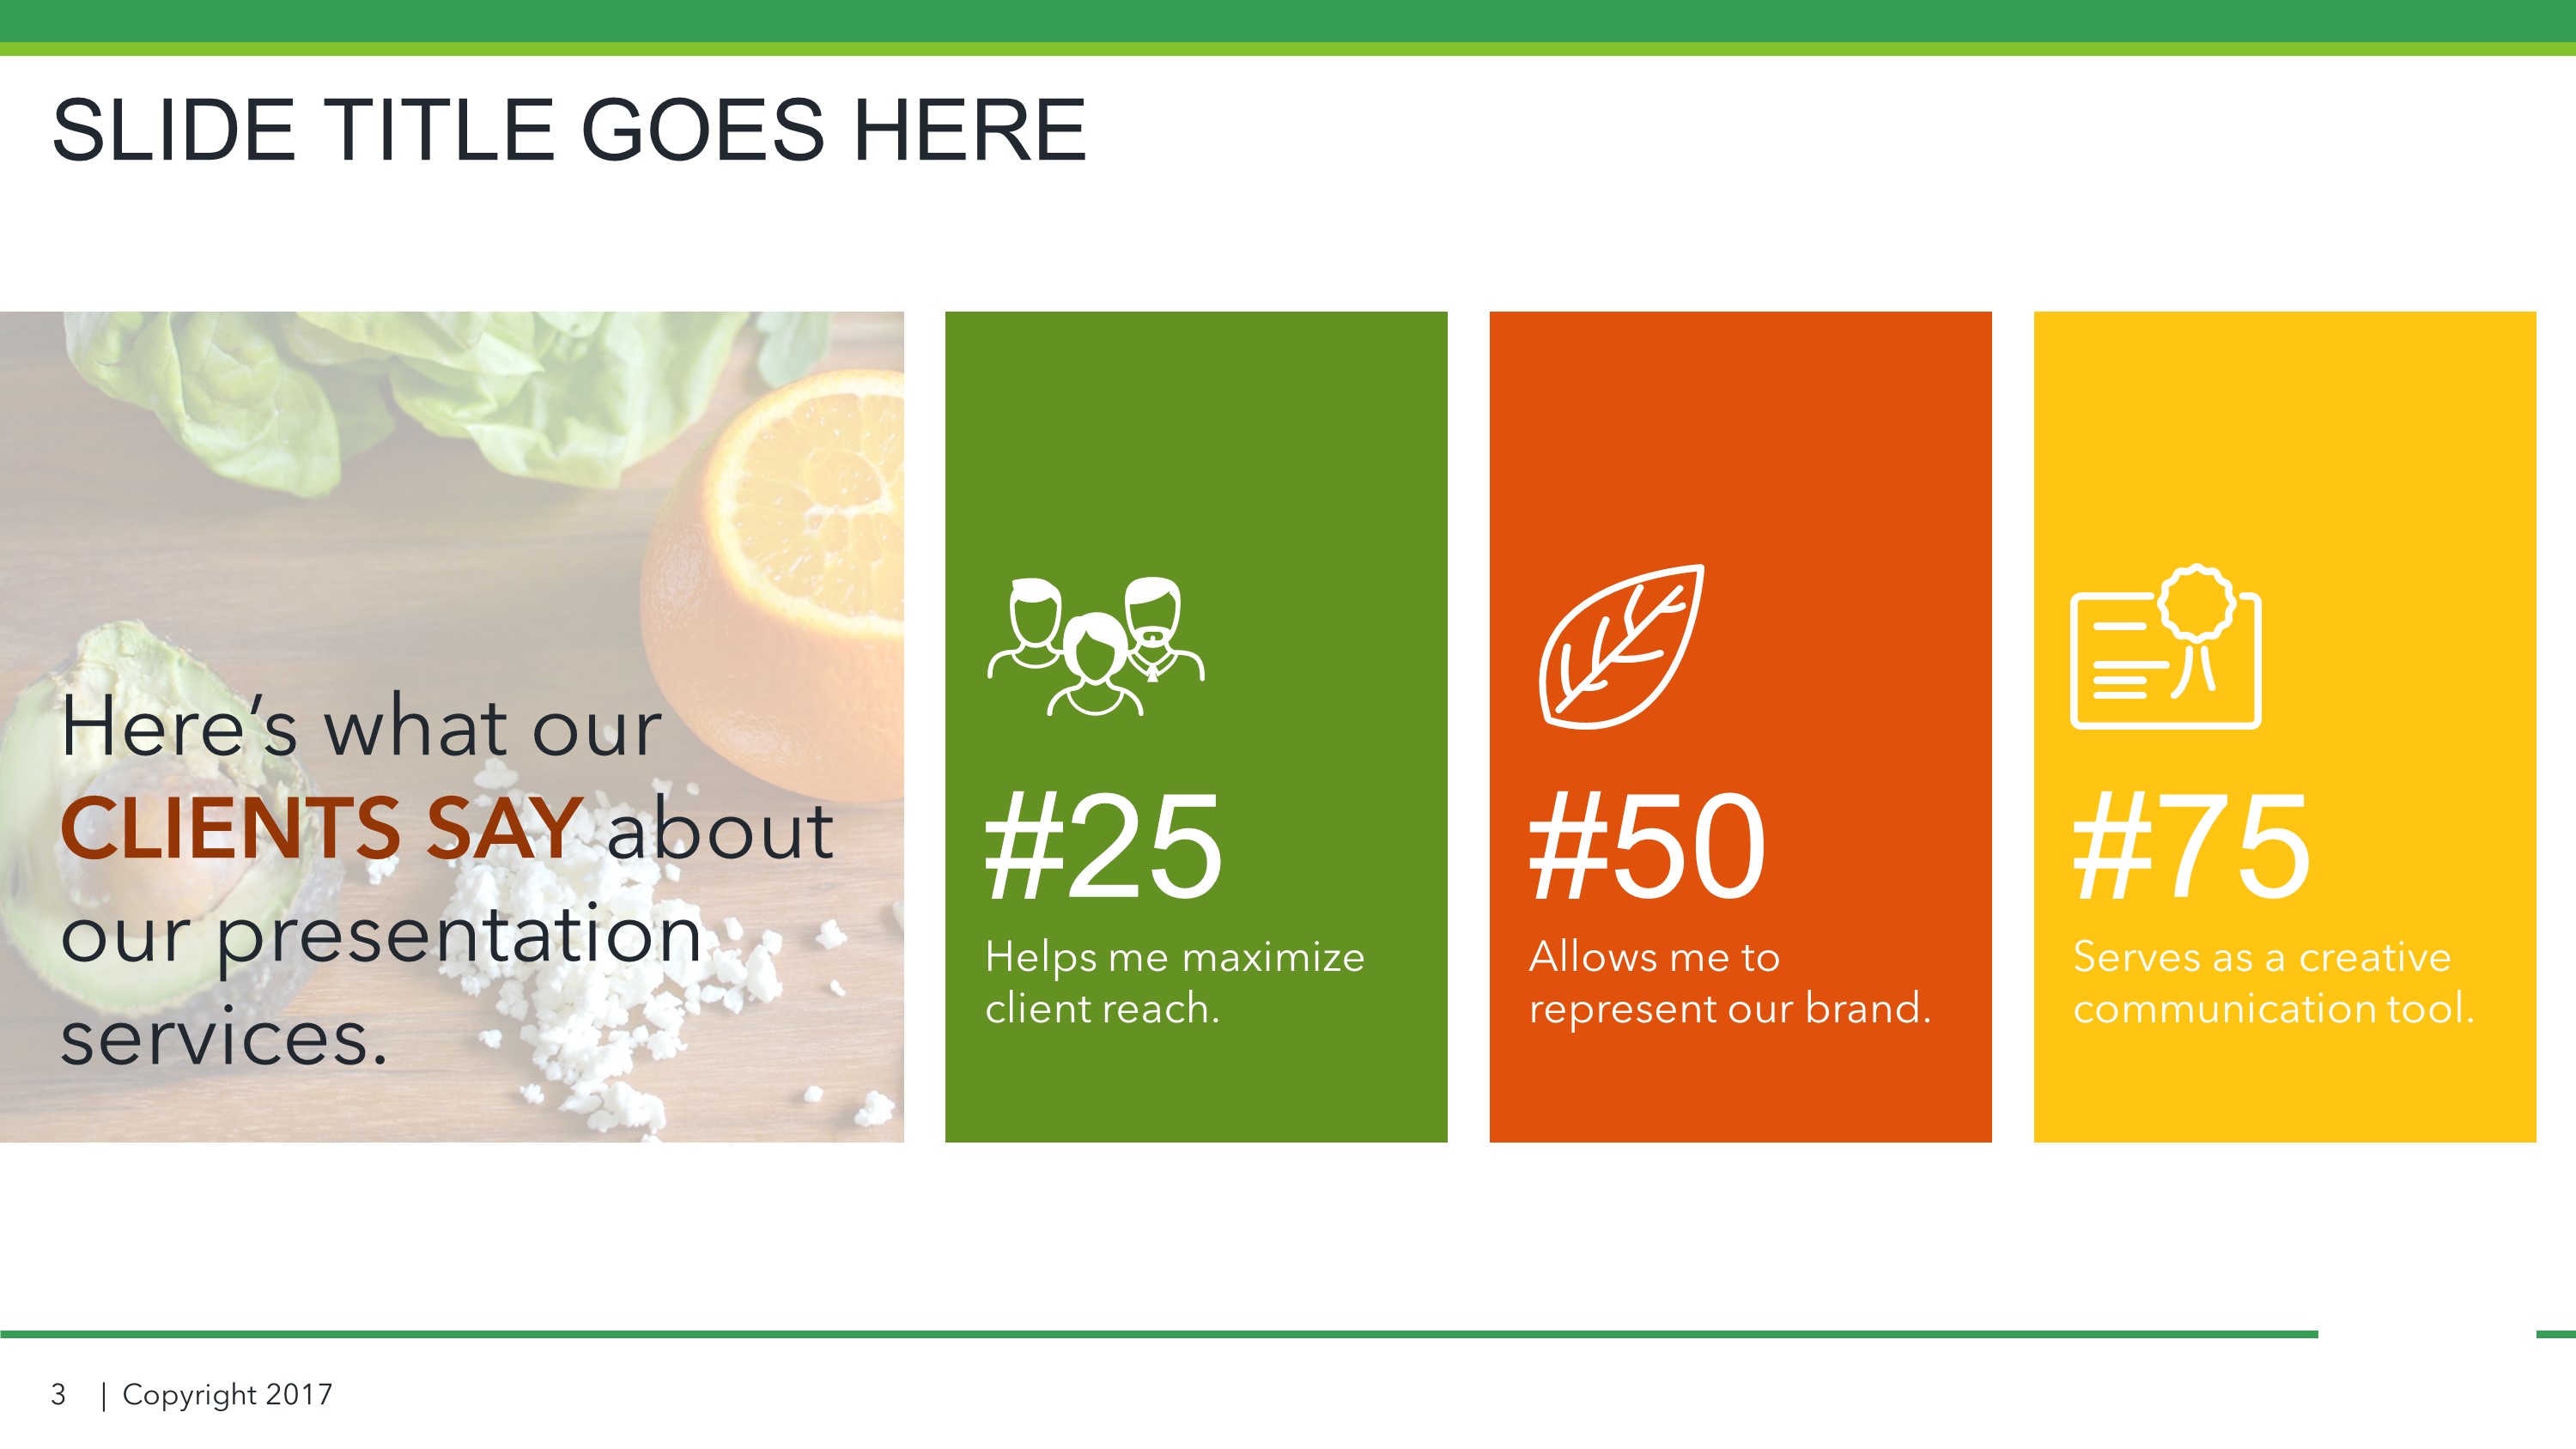 Food Industry About Us Slides for PowerPoint